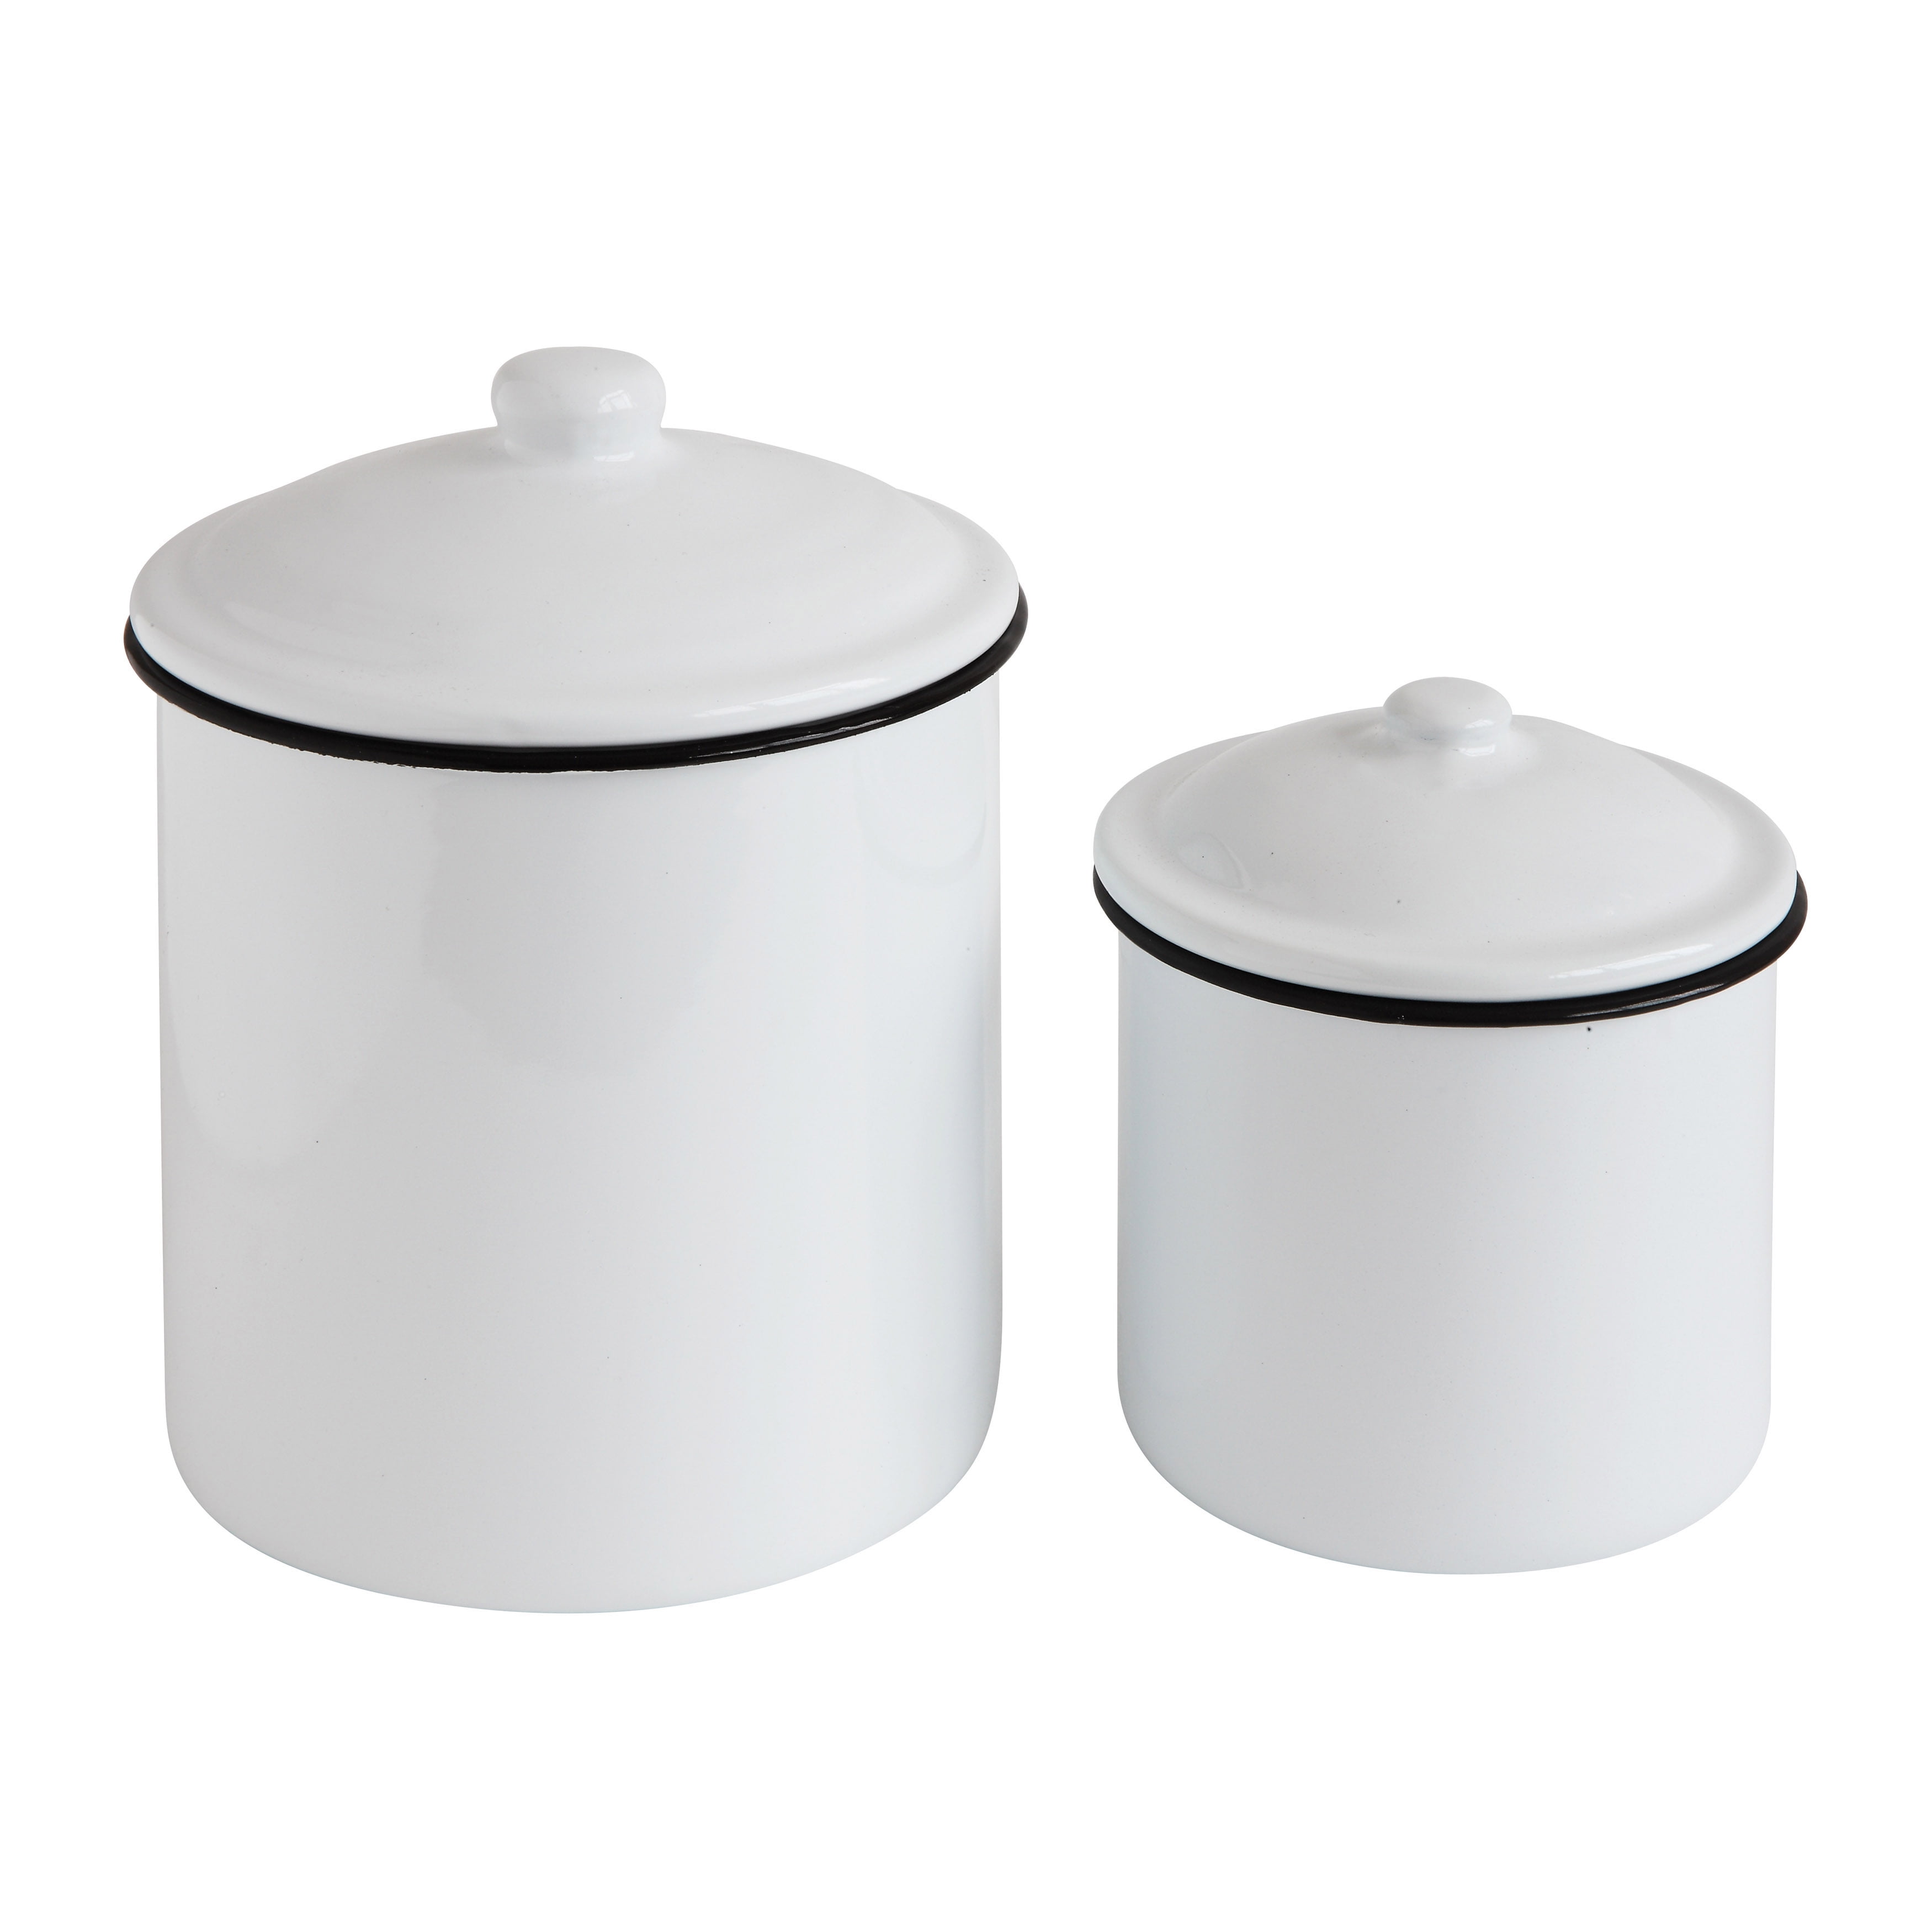 Enamel Ceramic Jars,Air Tight Decorative Canister Kitchen Food Storage Container 